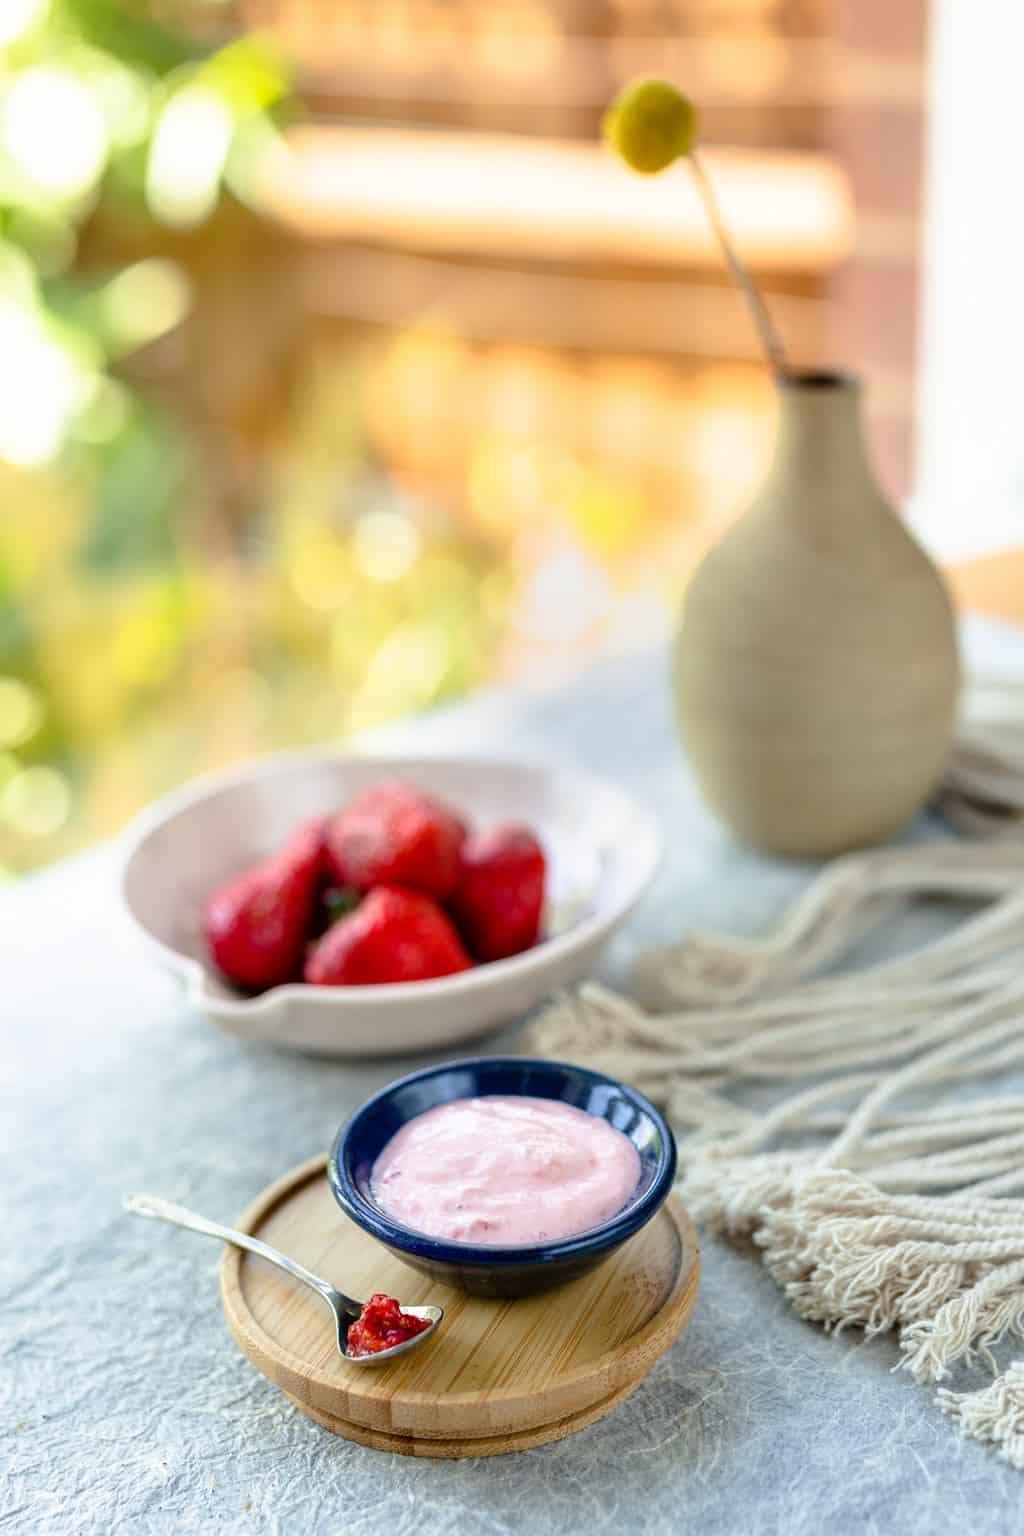 Yogurt, stawberry and coconut oil face mask recipe